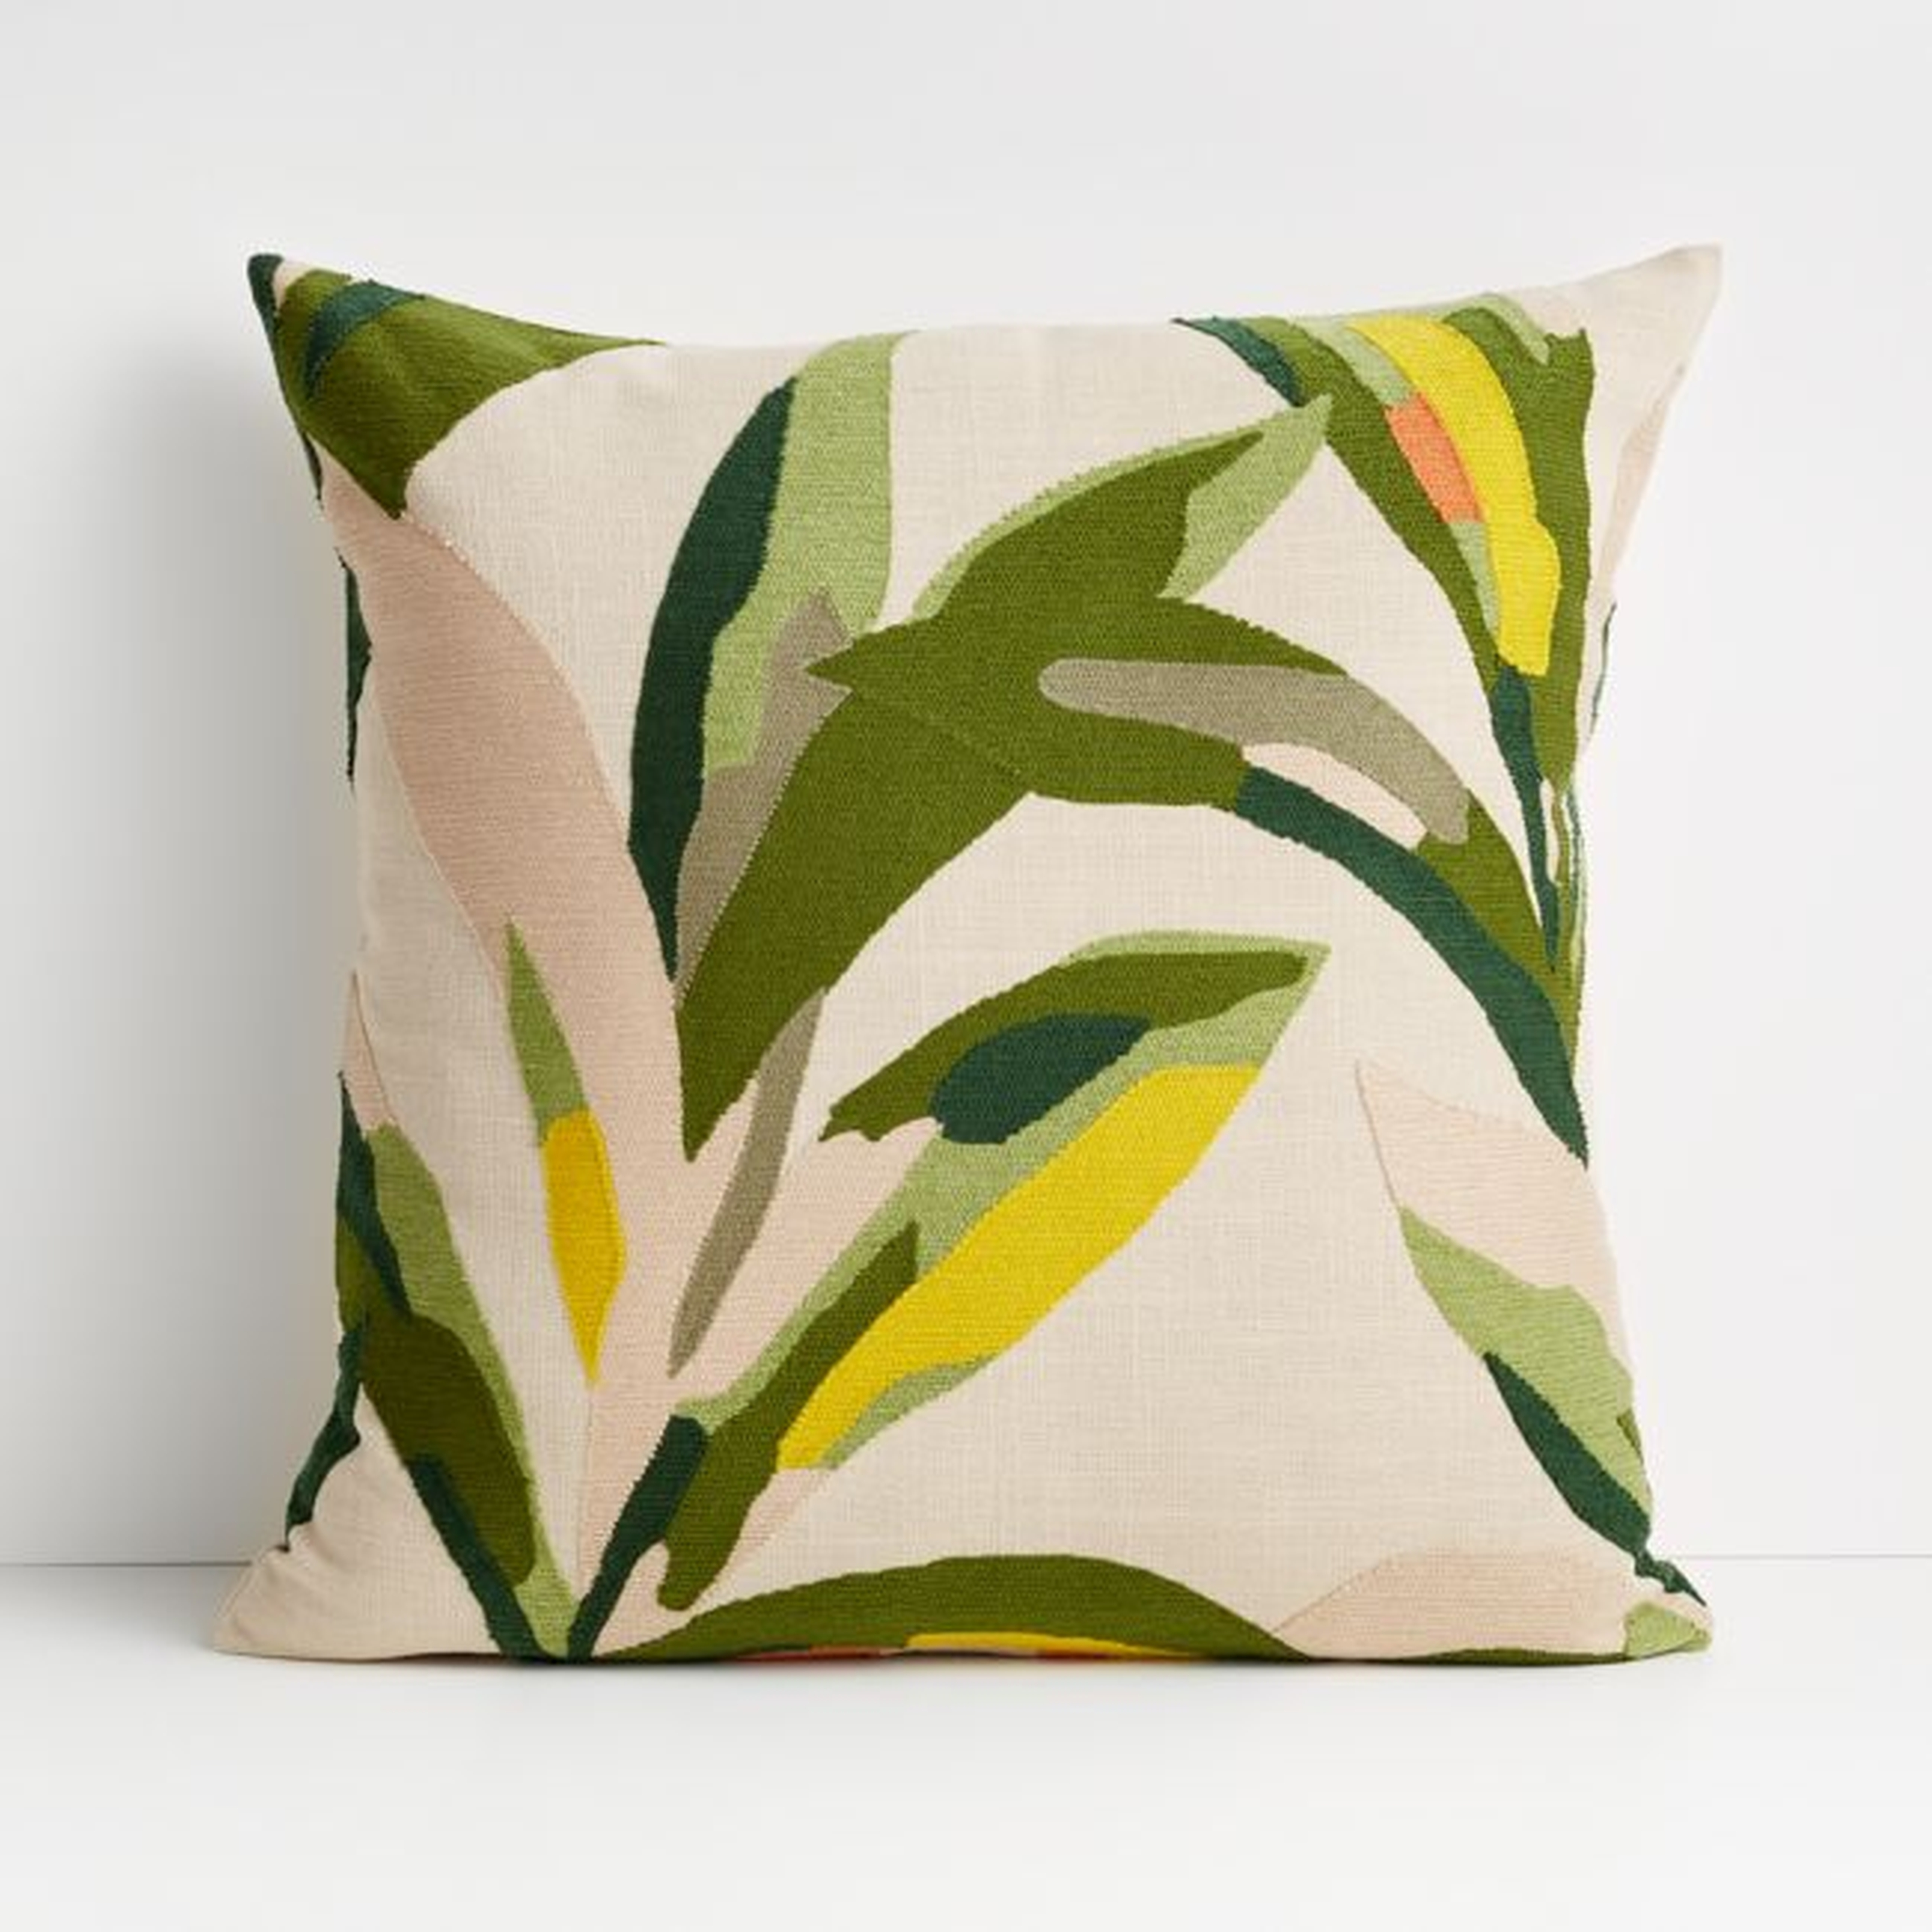 20" Palma Leaf Pillow Cover - Crate and Barrel